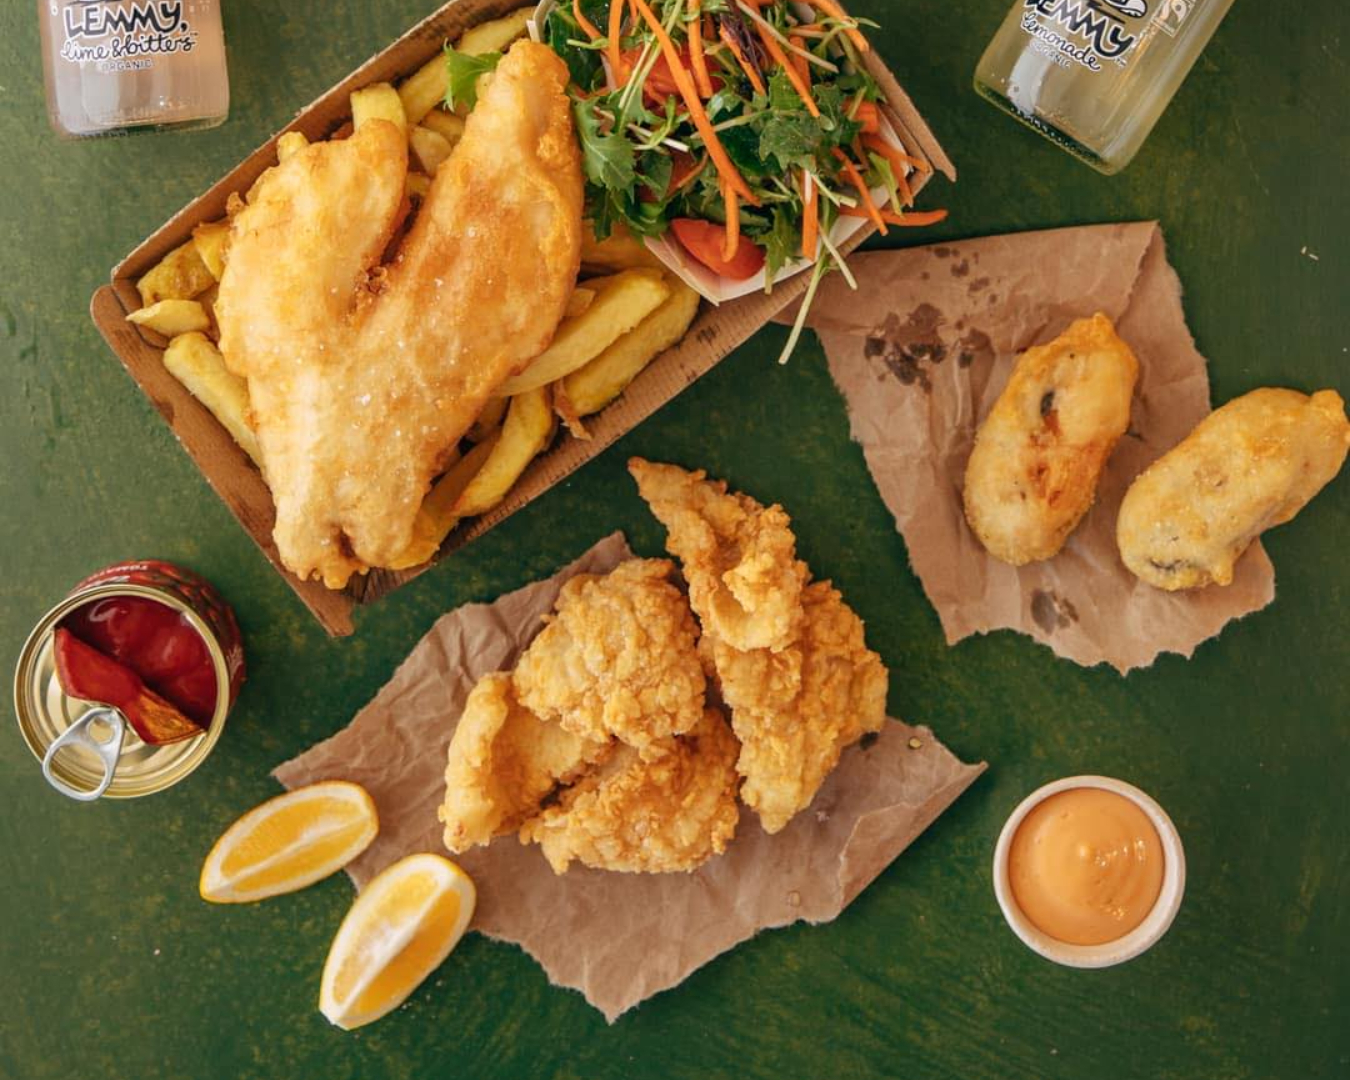 We look down on a delicious spread of fish and chips and fried sides from FishSmith in Herne Bay